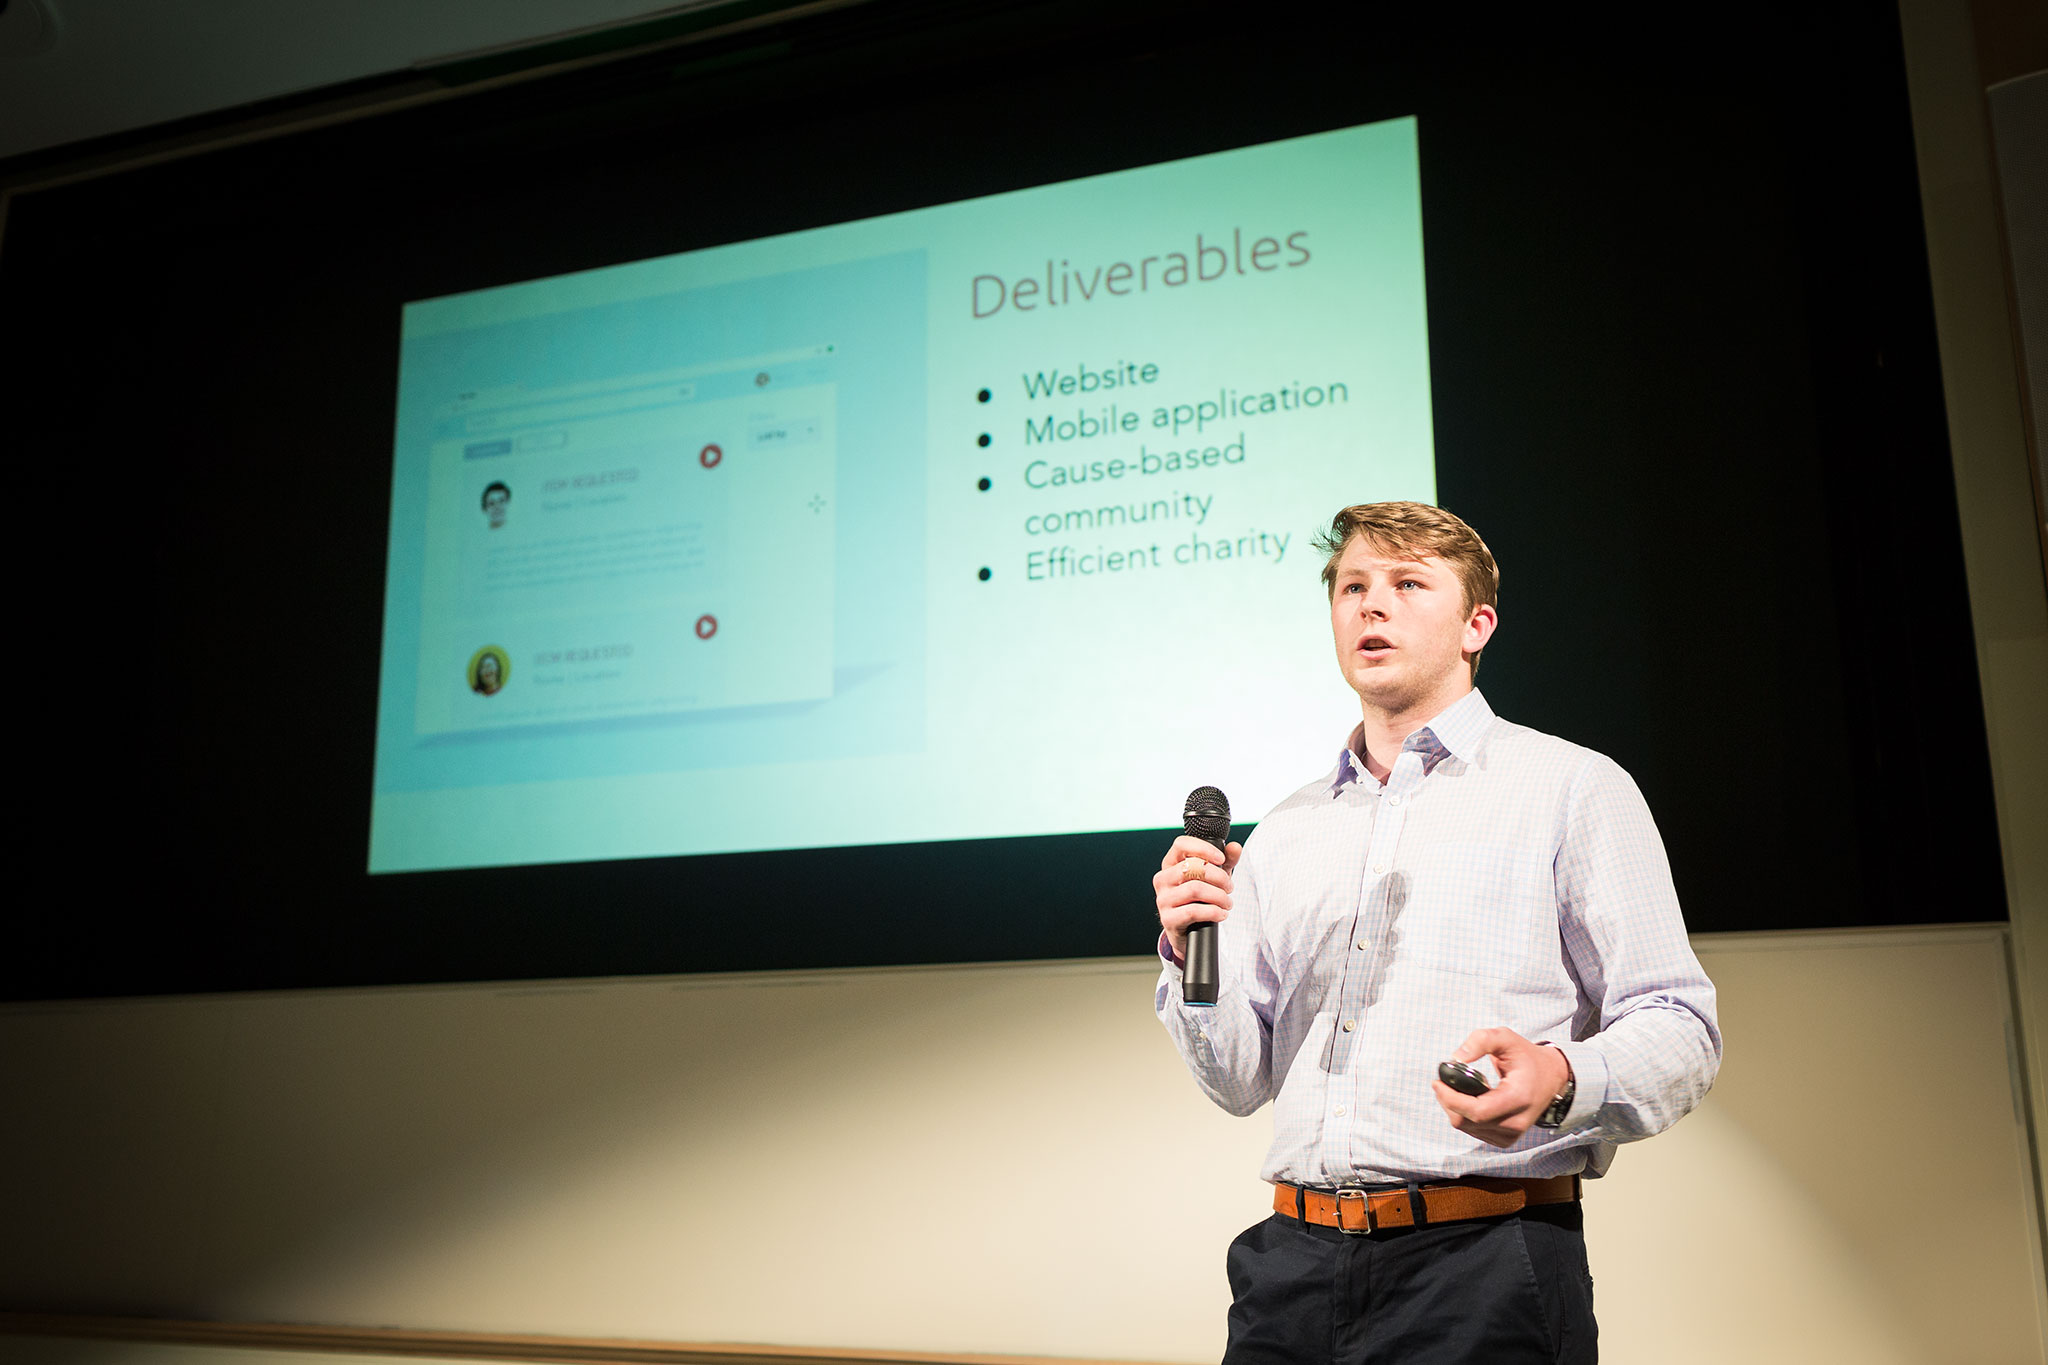 A student presents "Sharity" at the Pitch event in spring 2017.